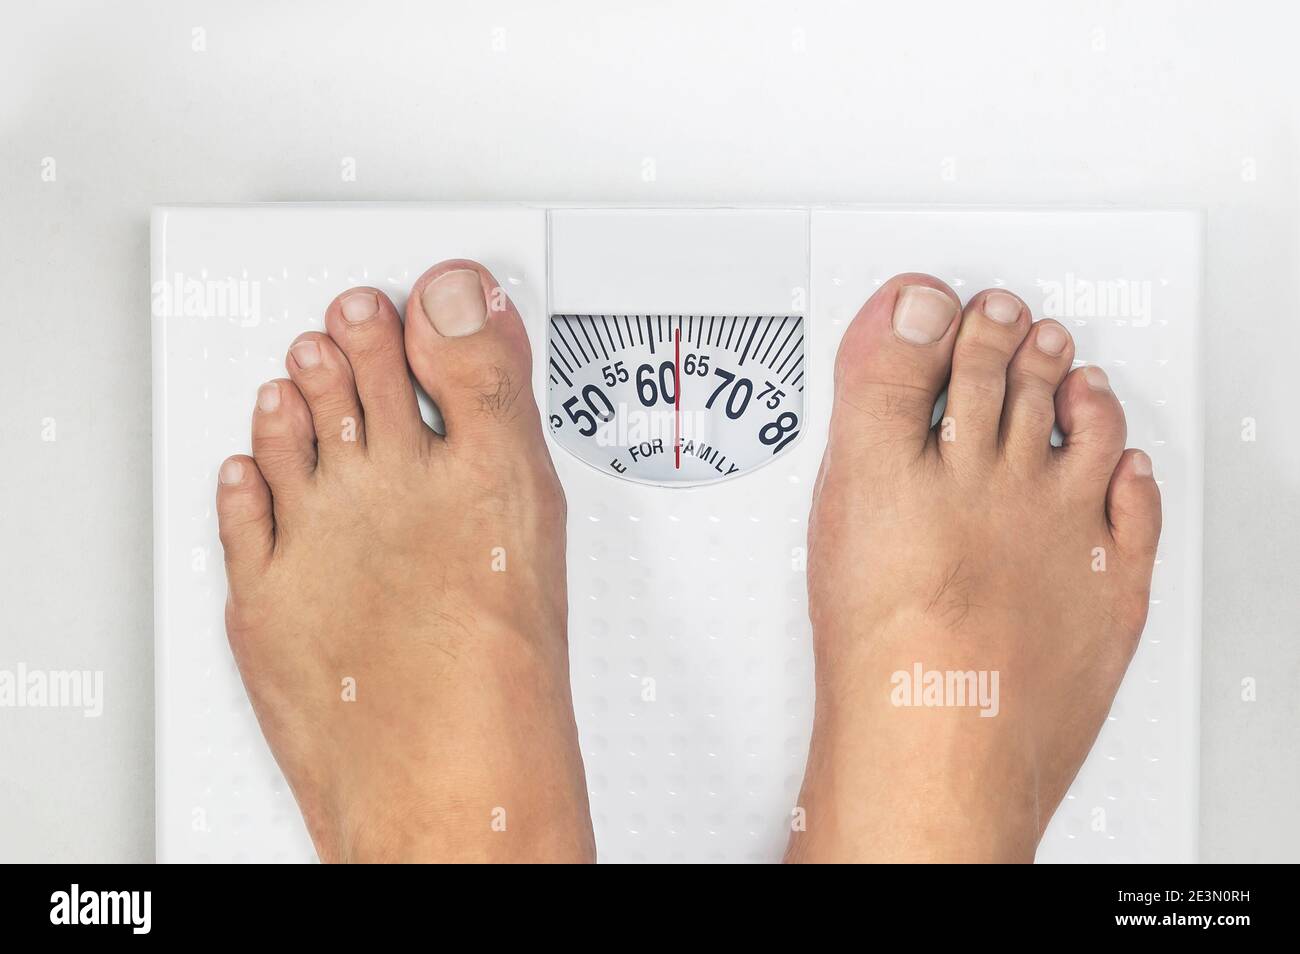 Human Foot On Weighing Scale Stock Photo - Alamy